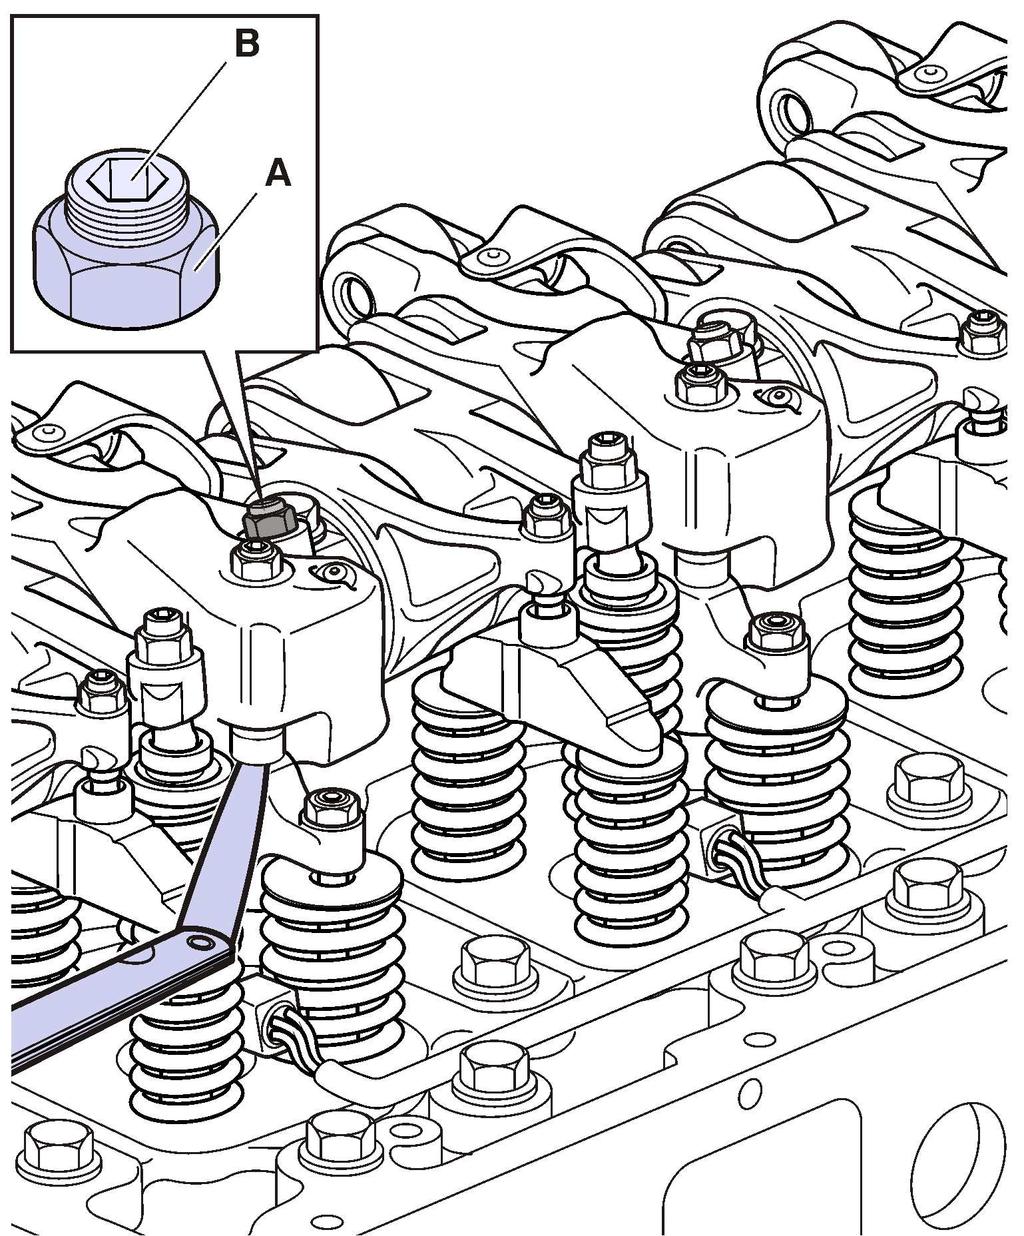 Service Bulletin 7.2013 214 93 02 11(13) 24 If the clearance is not within specification, loosen the brake rocker arm lock nut (A) and turn the adjuster screw (B) 1/2 to 1 turn counter-clockwise.